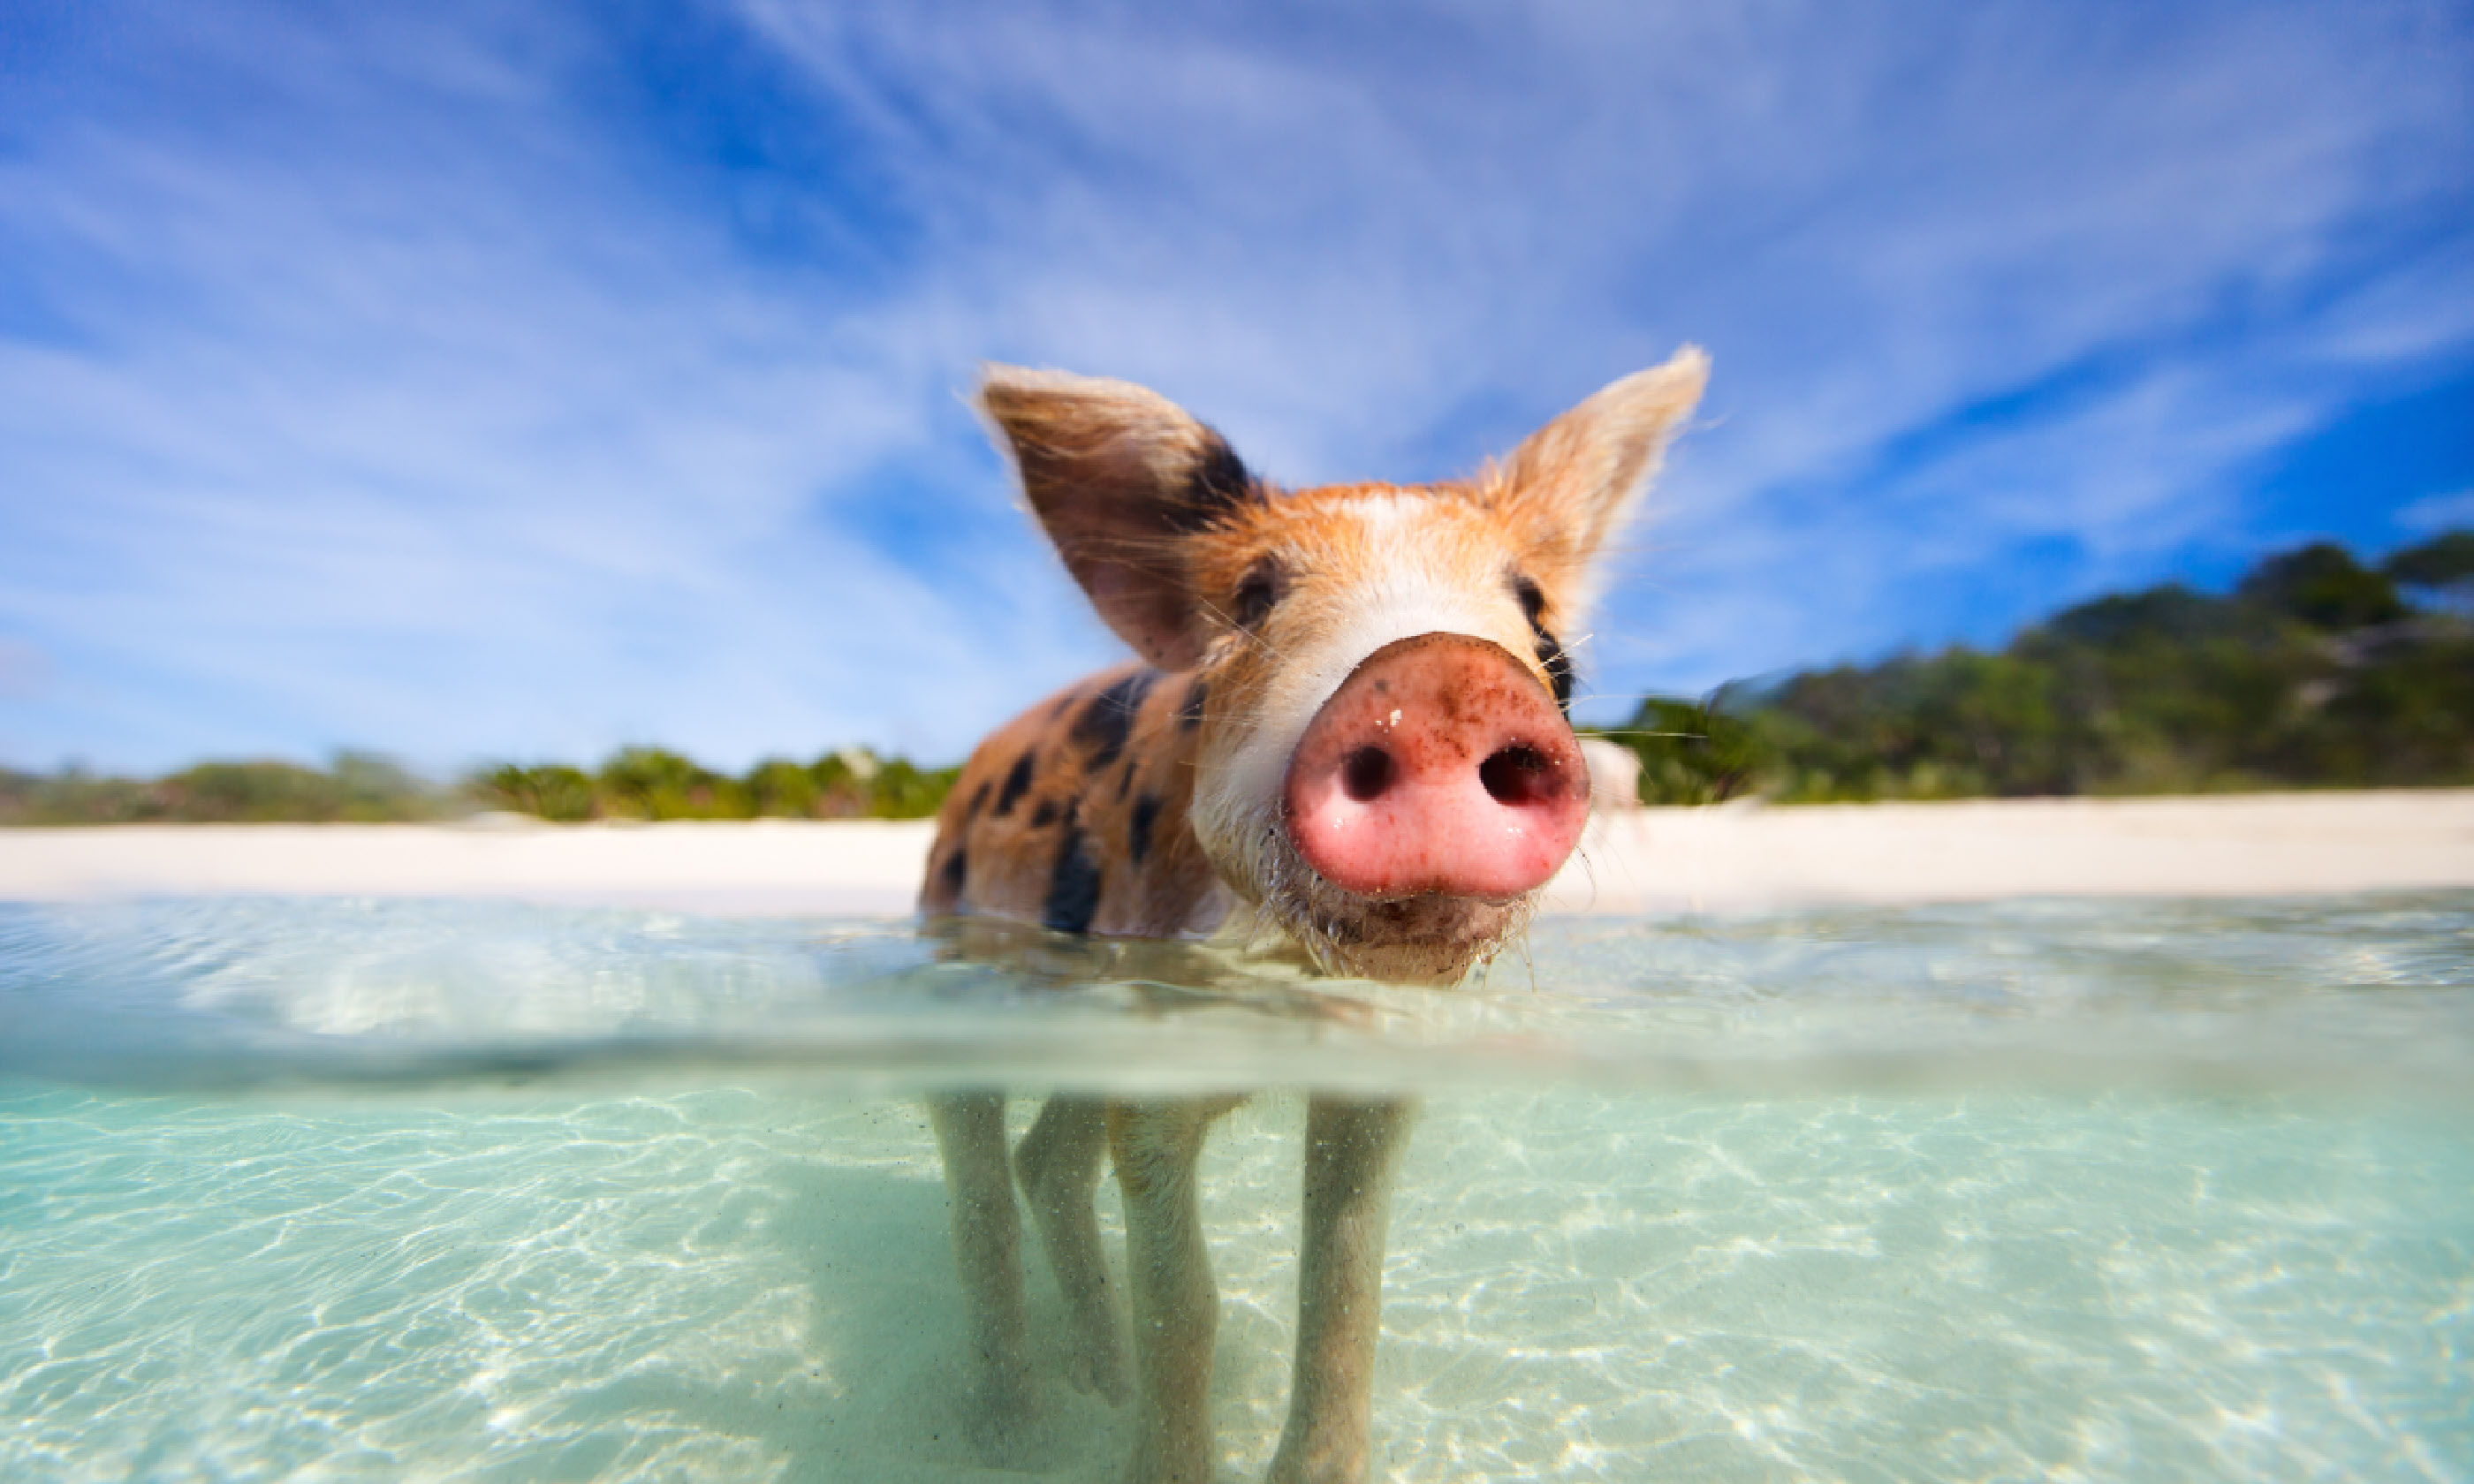 Piglet in the water at Pig Island (Shutterstock: see credit below)